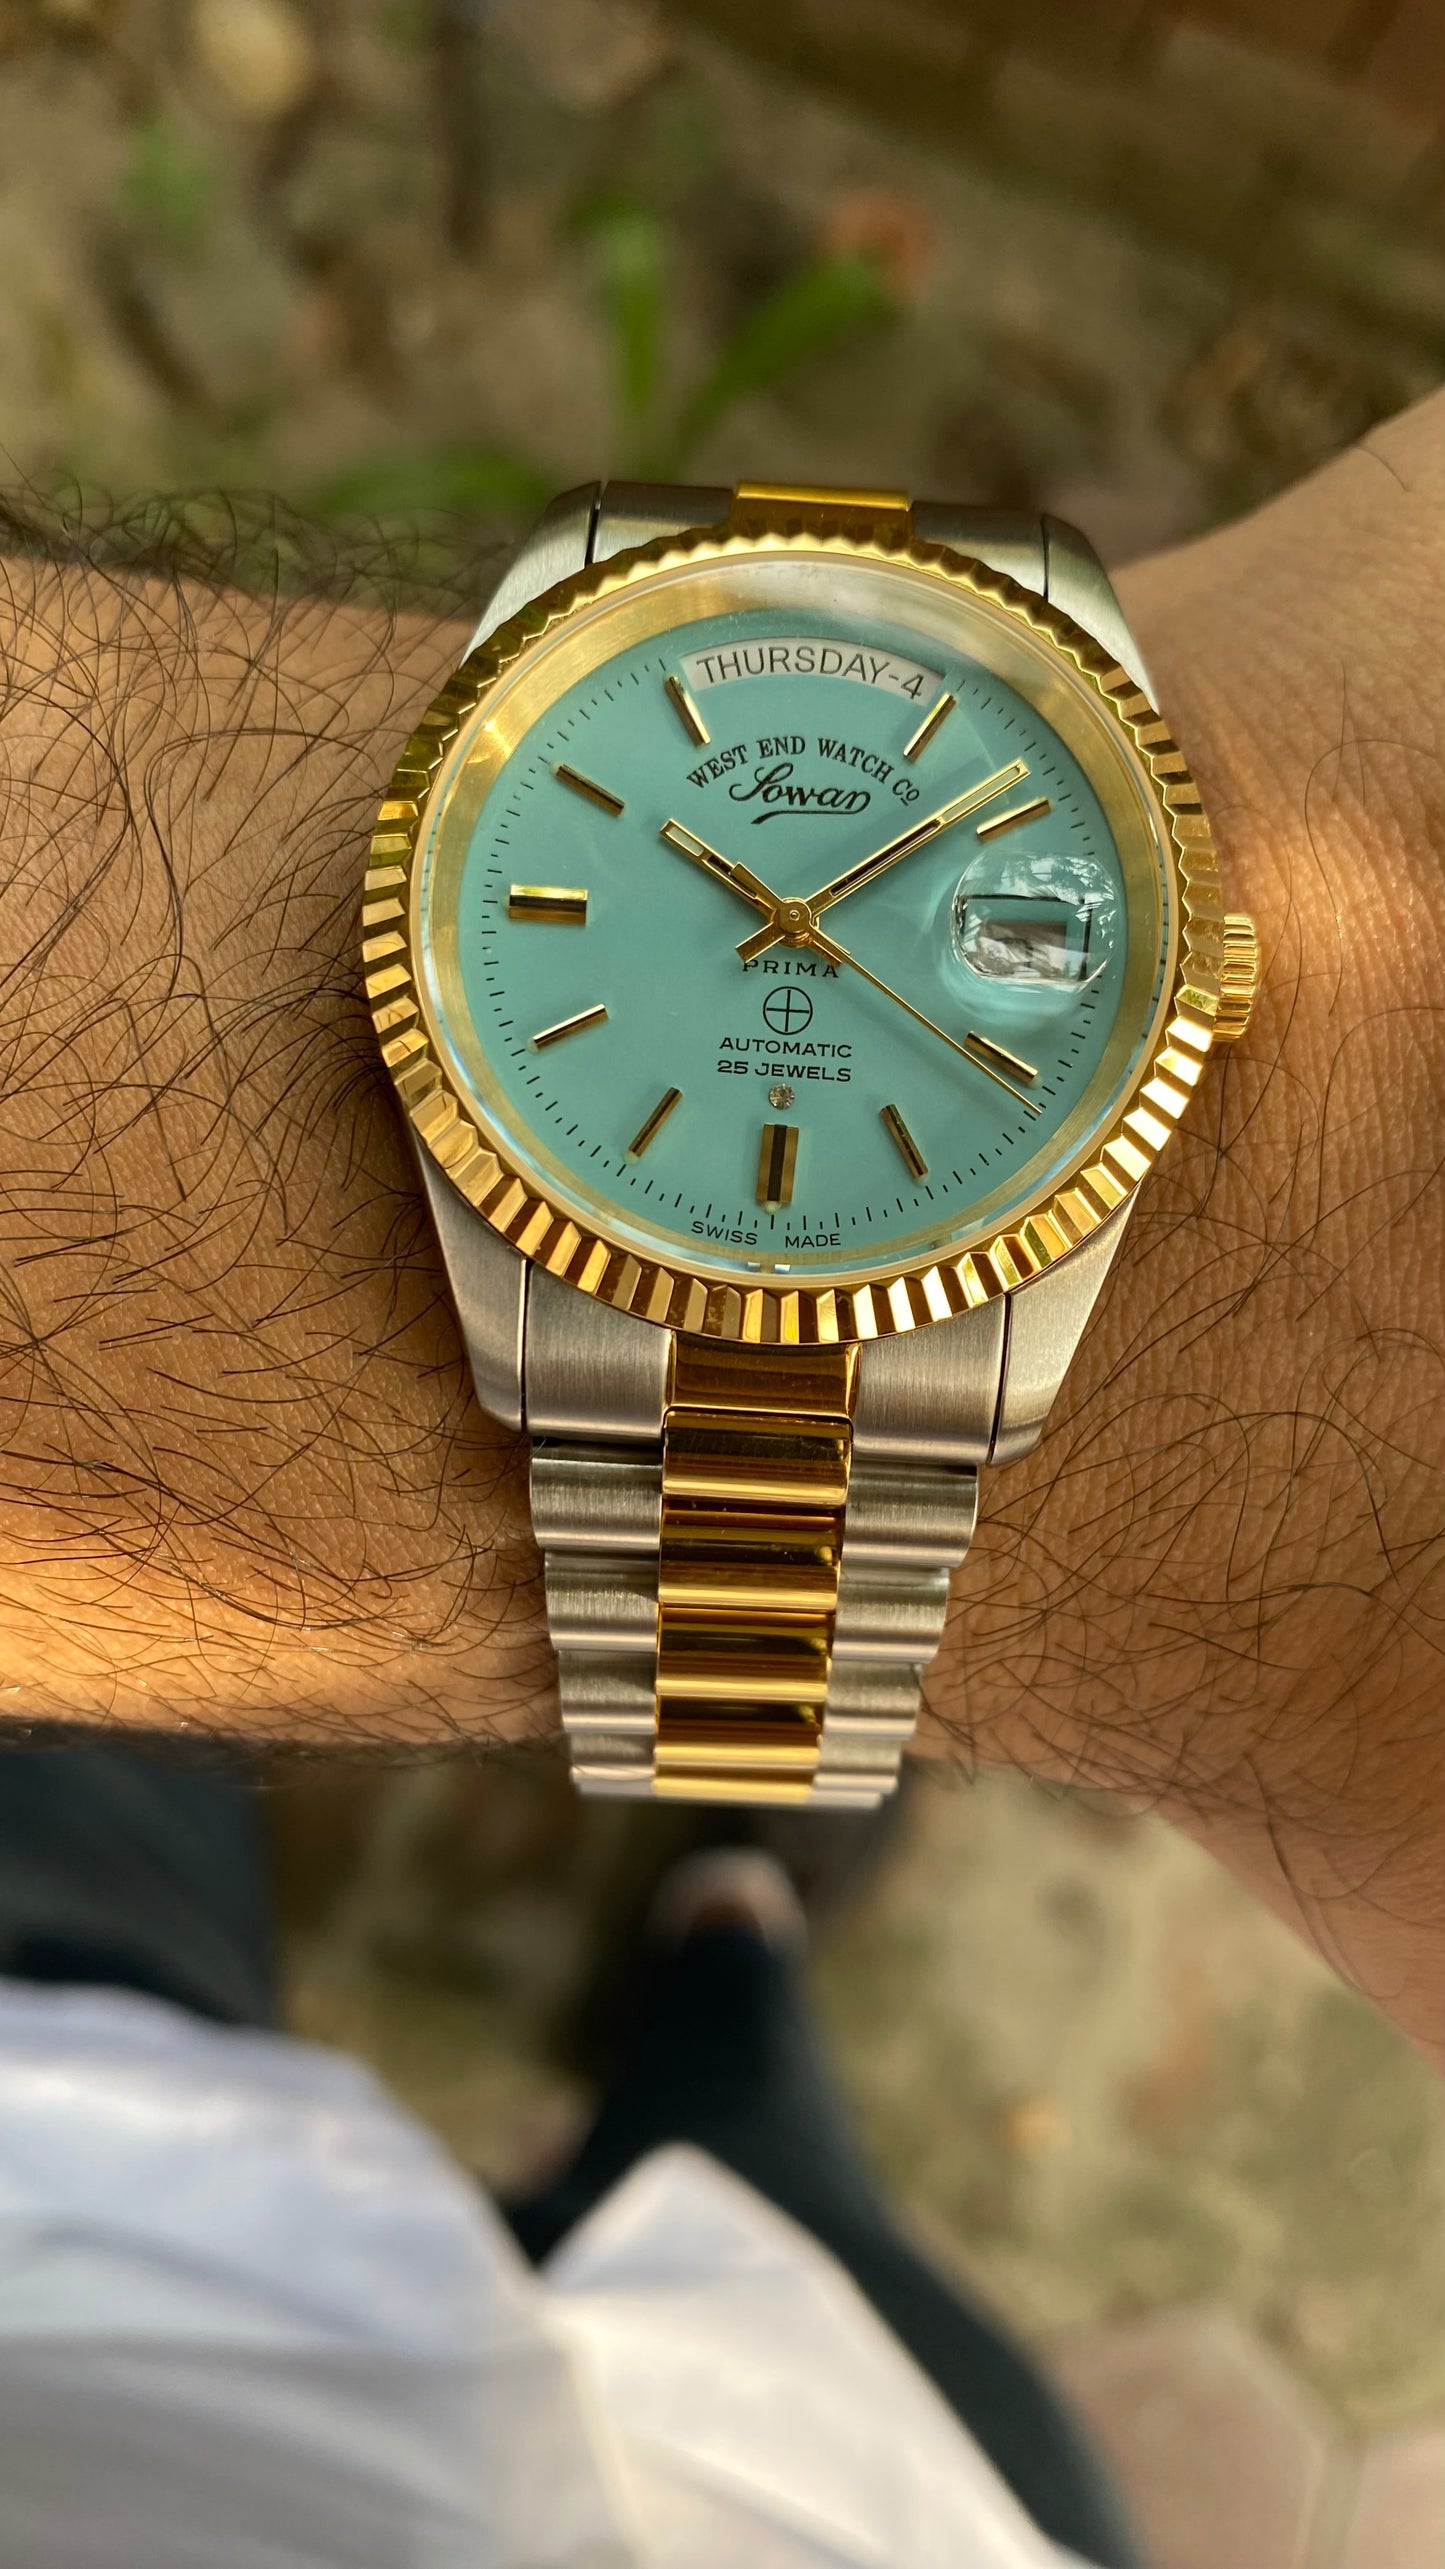 West end watch Co. Tiffany dial Day/Date